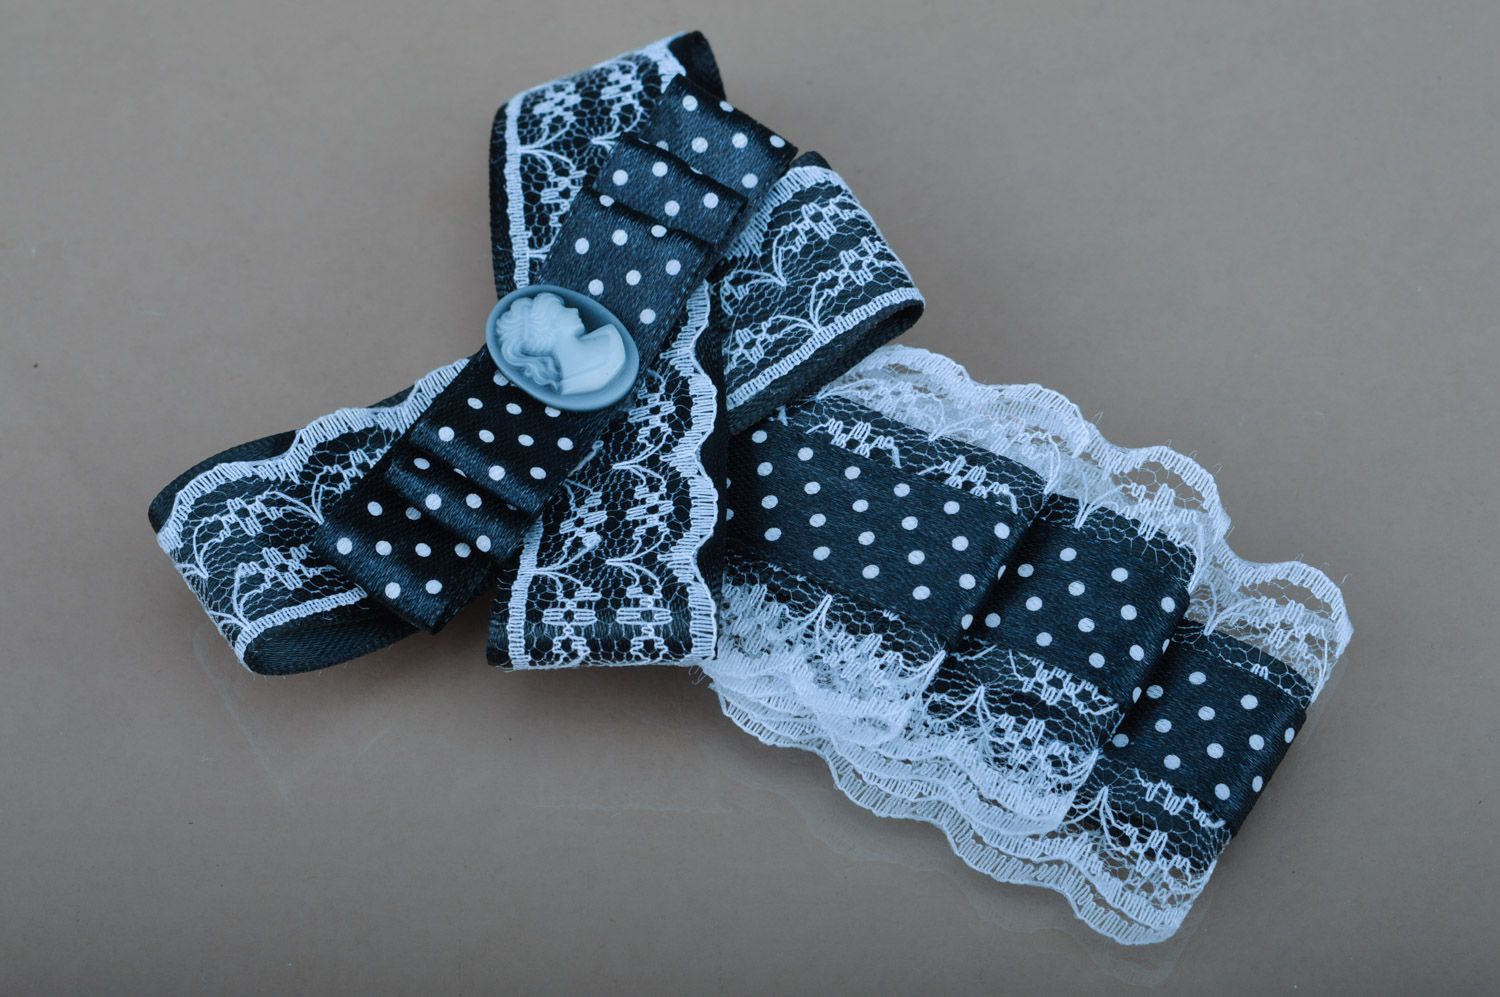 Handmade black and white polka dot fabric jabot brooch with cameo and lace photo 4